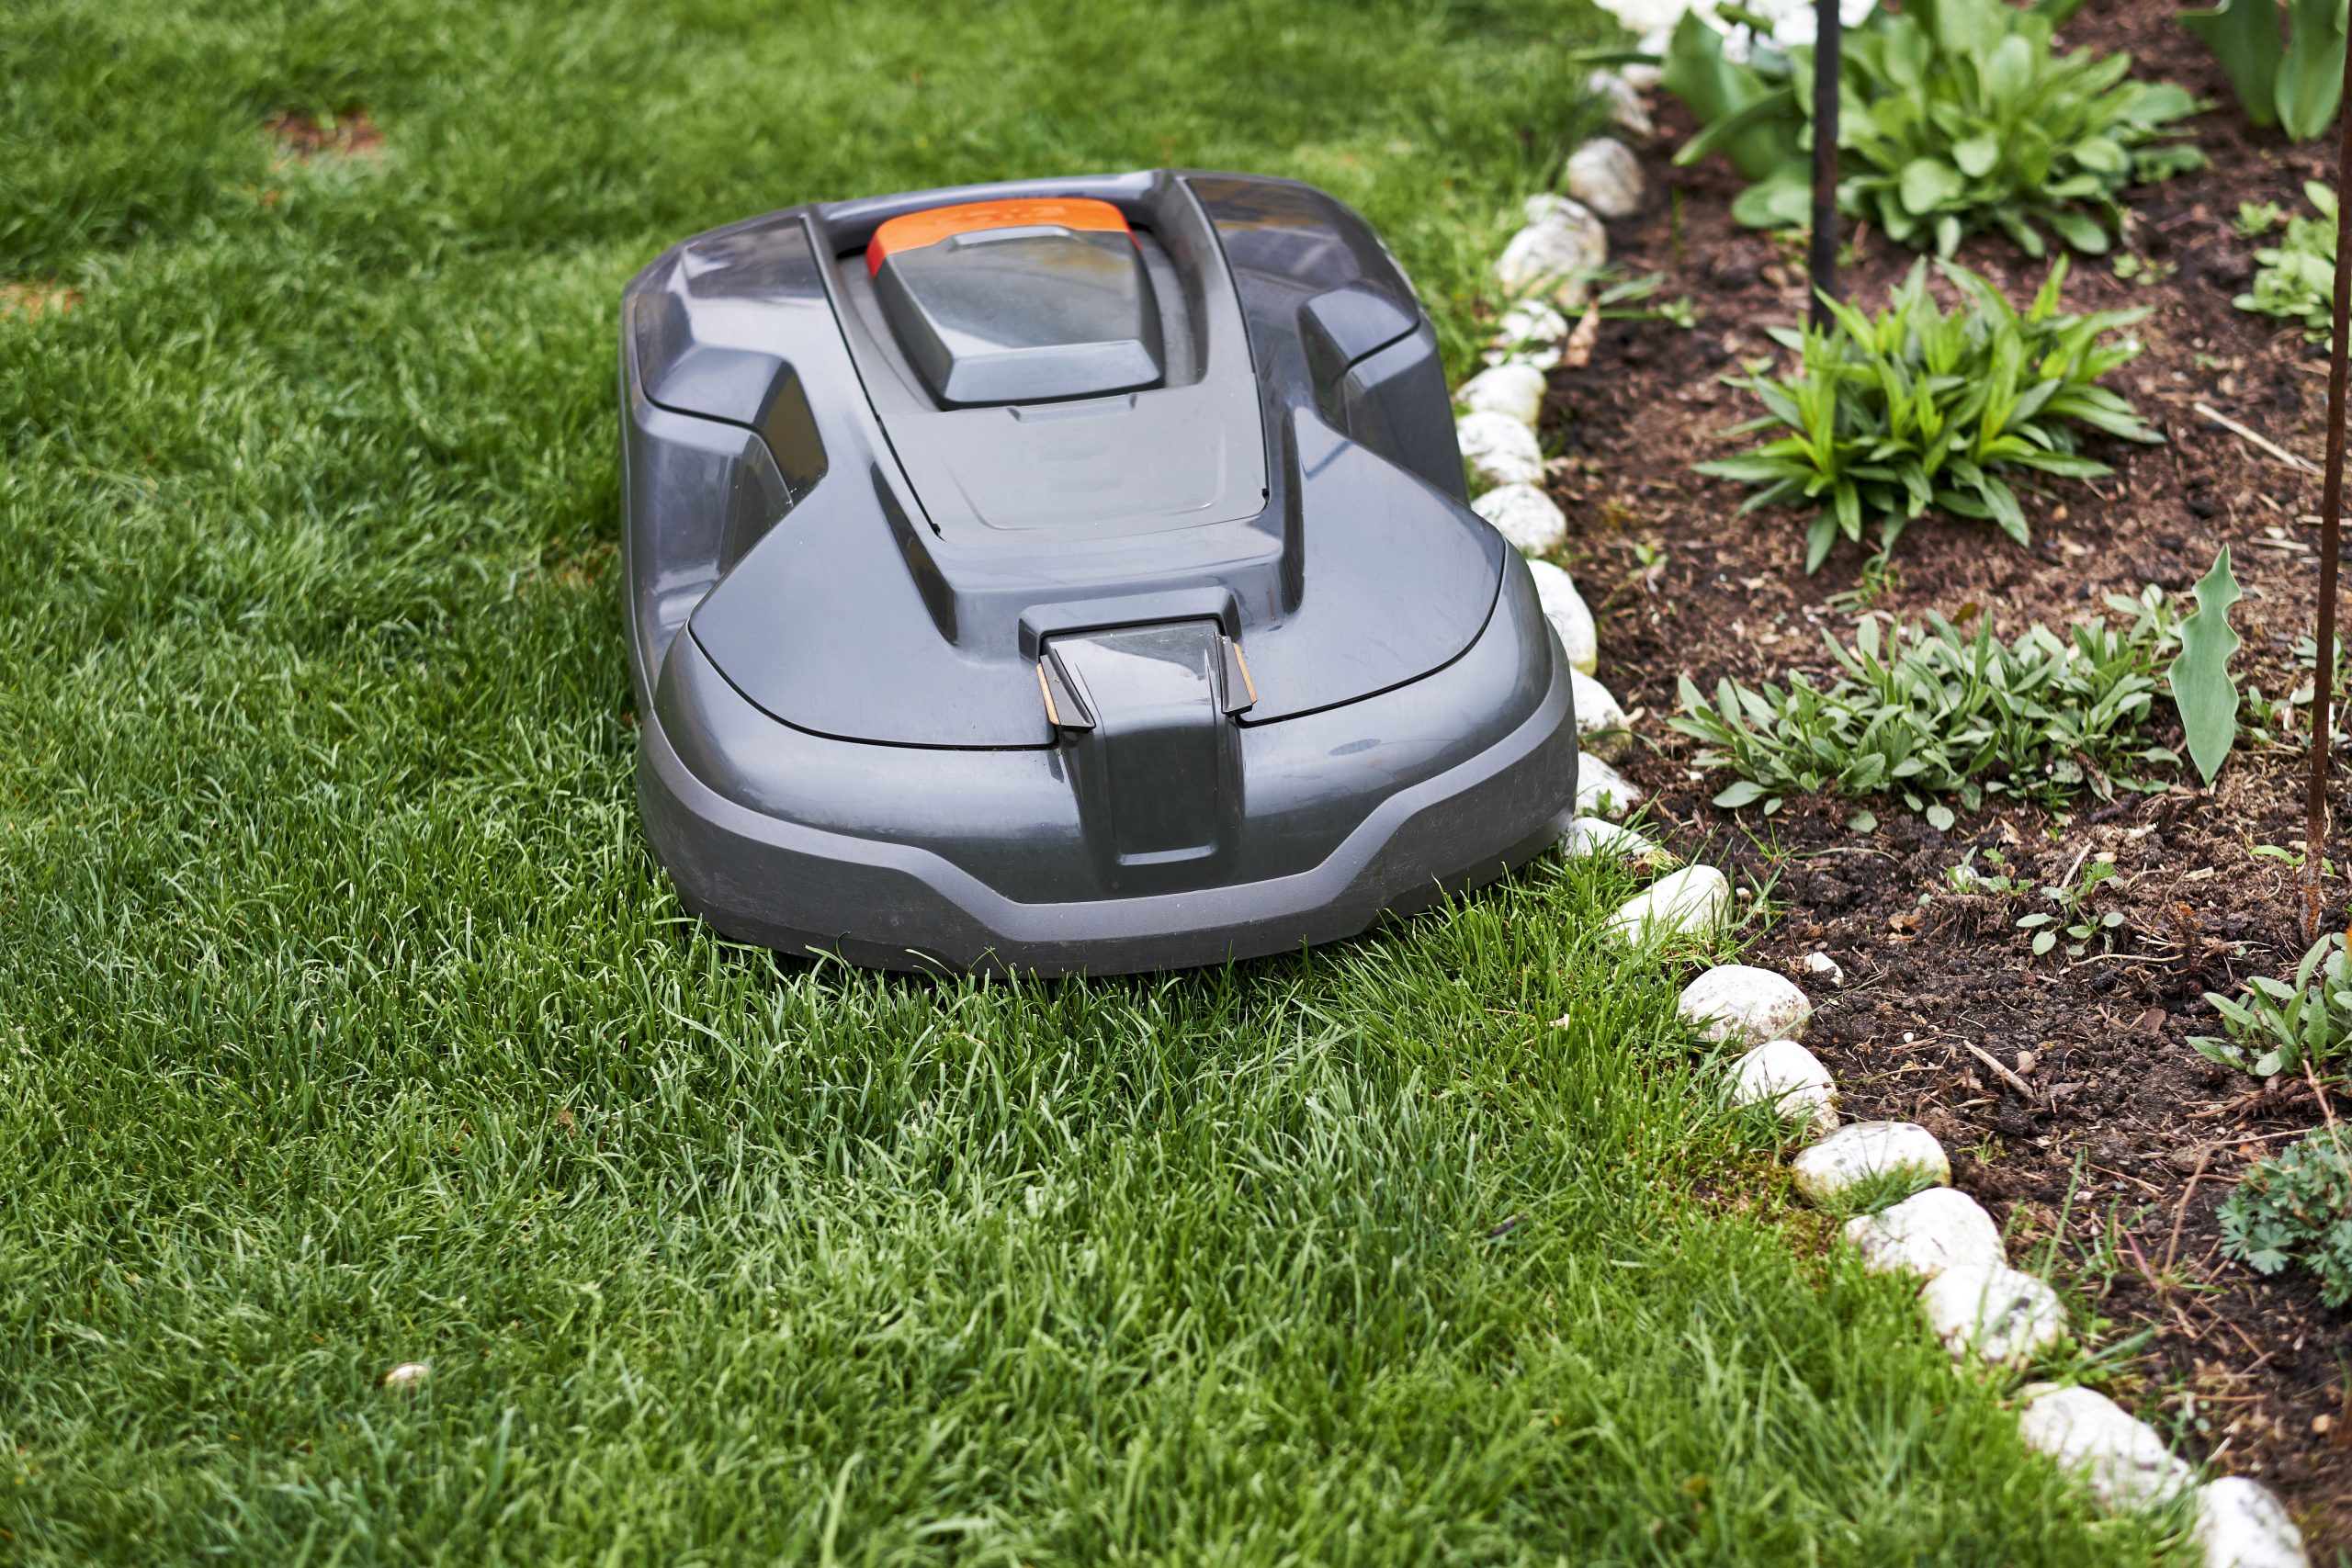 Automated Robot Lawn Mower Units for Your |